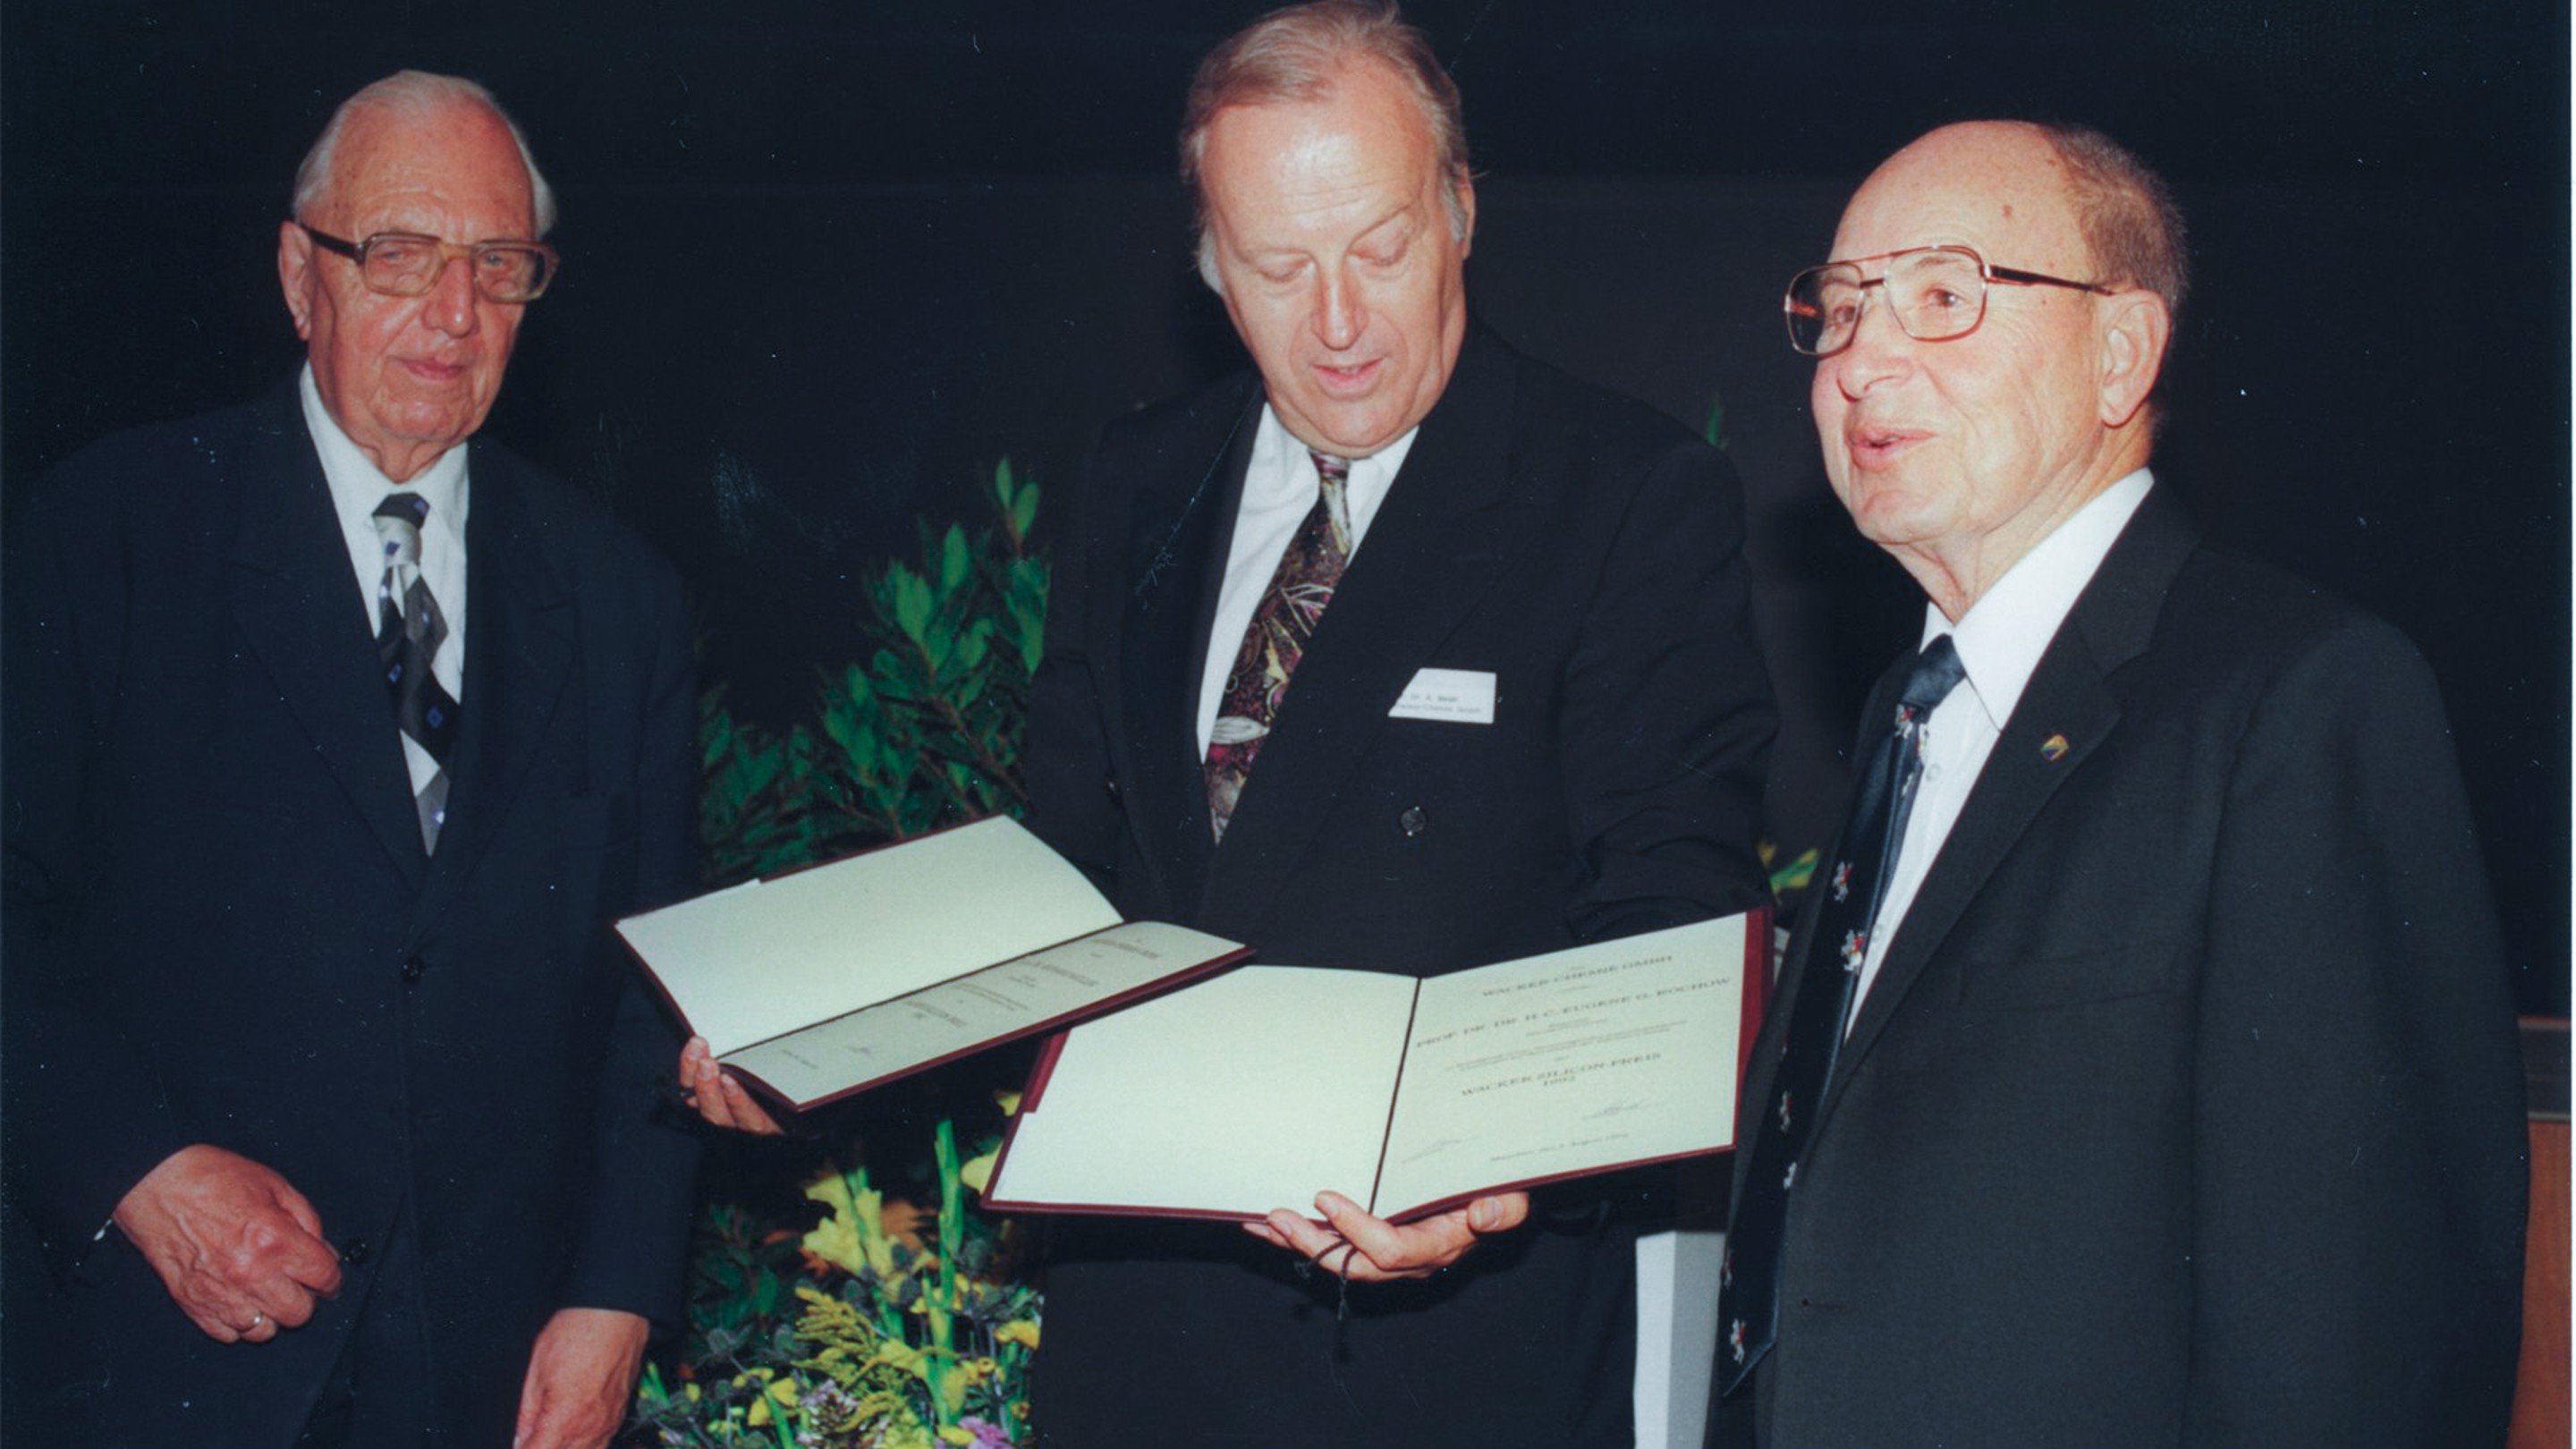 Dr. Stroh (center) presented the WACKER Silicone Award to Prof. Müller (left) and Prof. Rochow (right) in 1992.